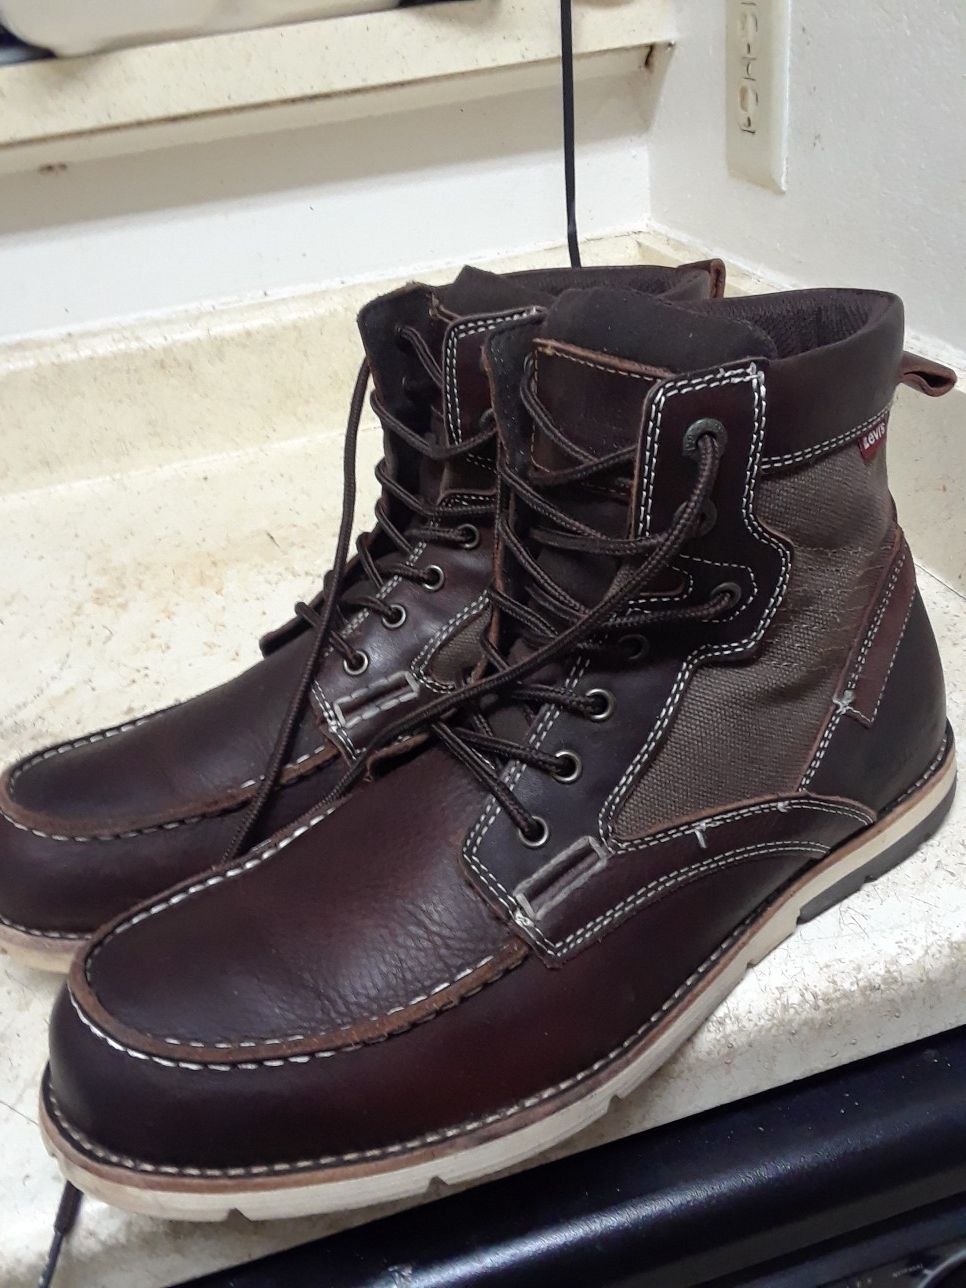 Size 13 LEVI'S MEN'S LEATHER BOOTS IN EXCELLENT CONDITION. BARELY USED IT.